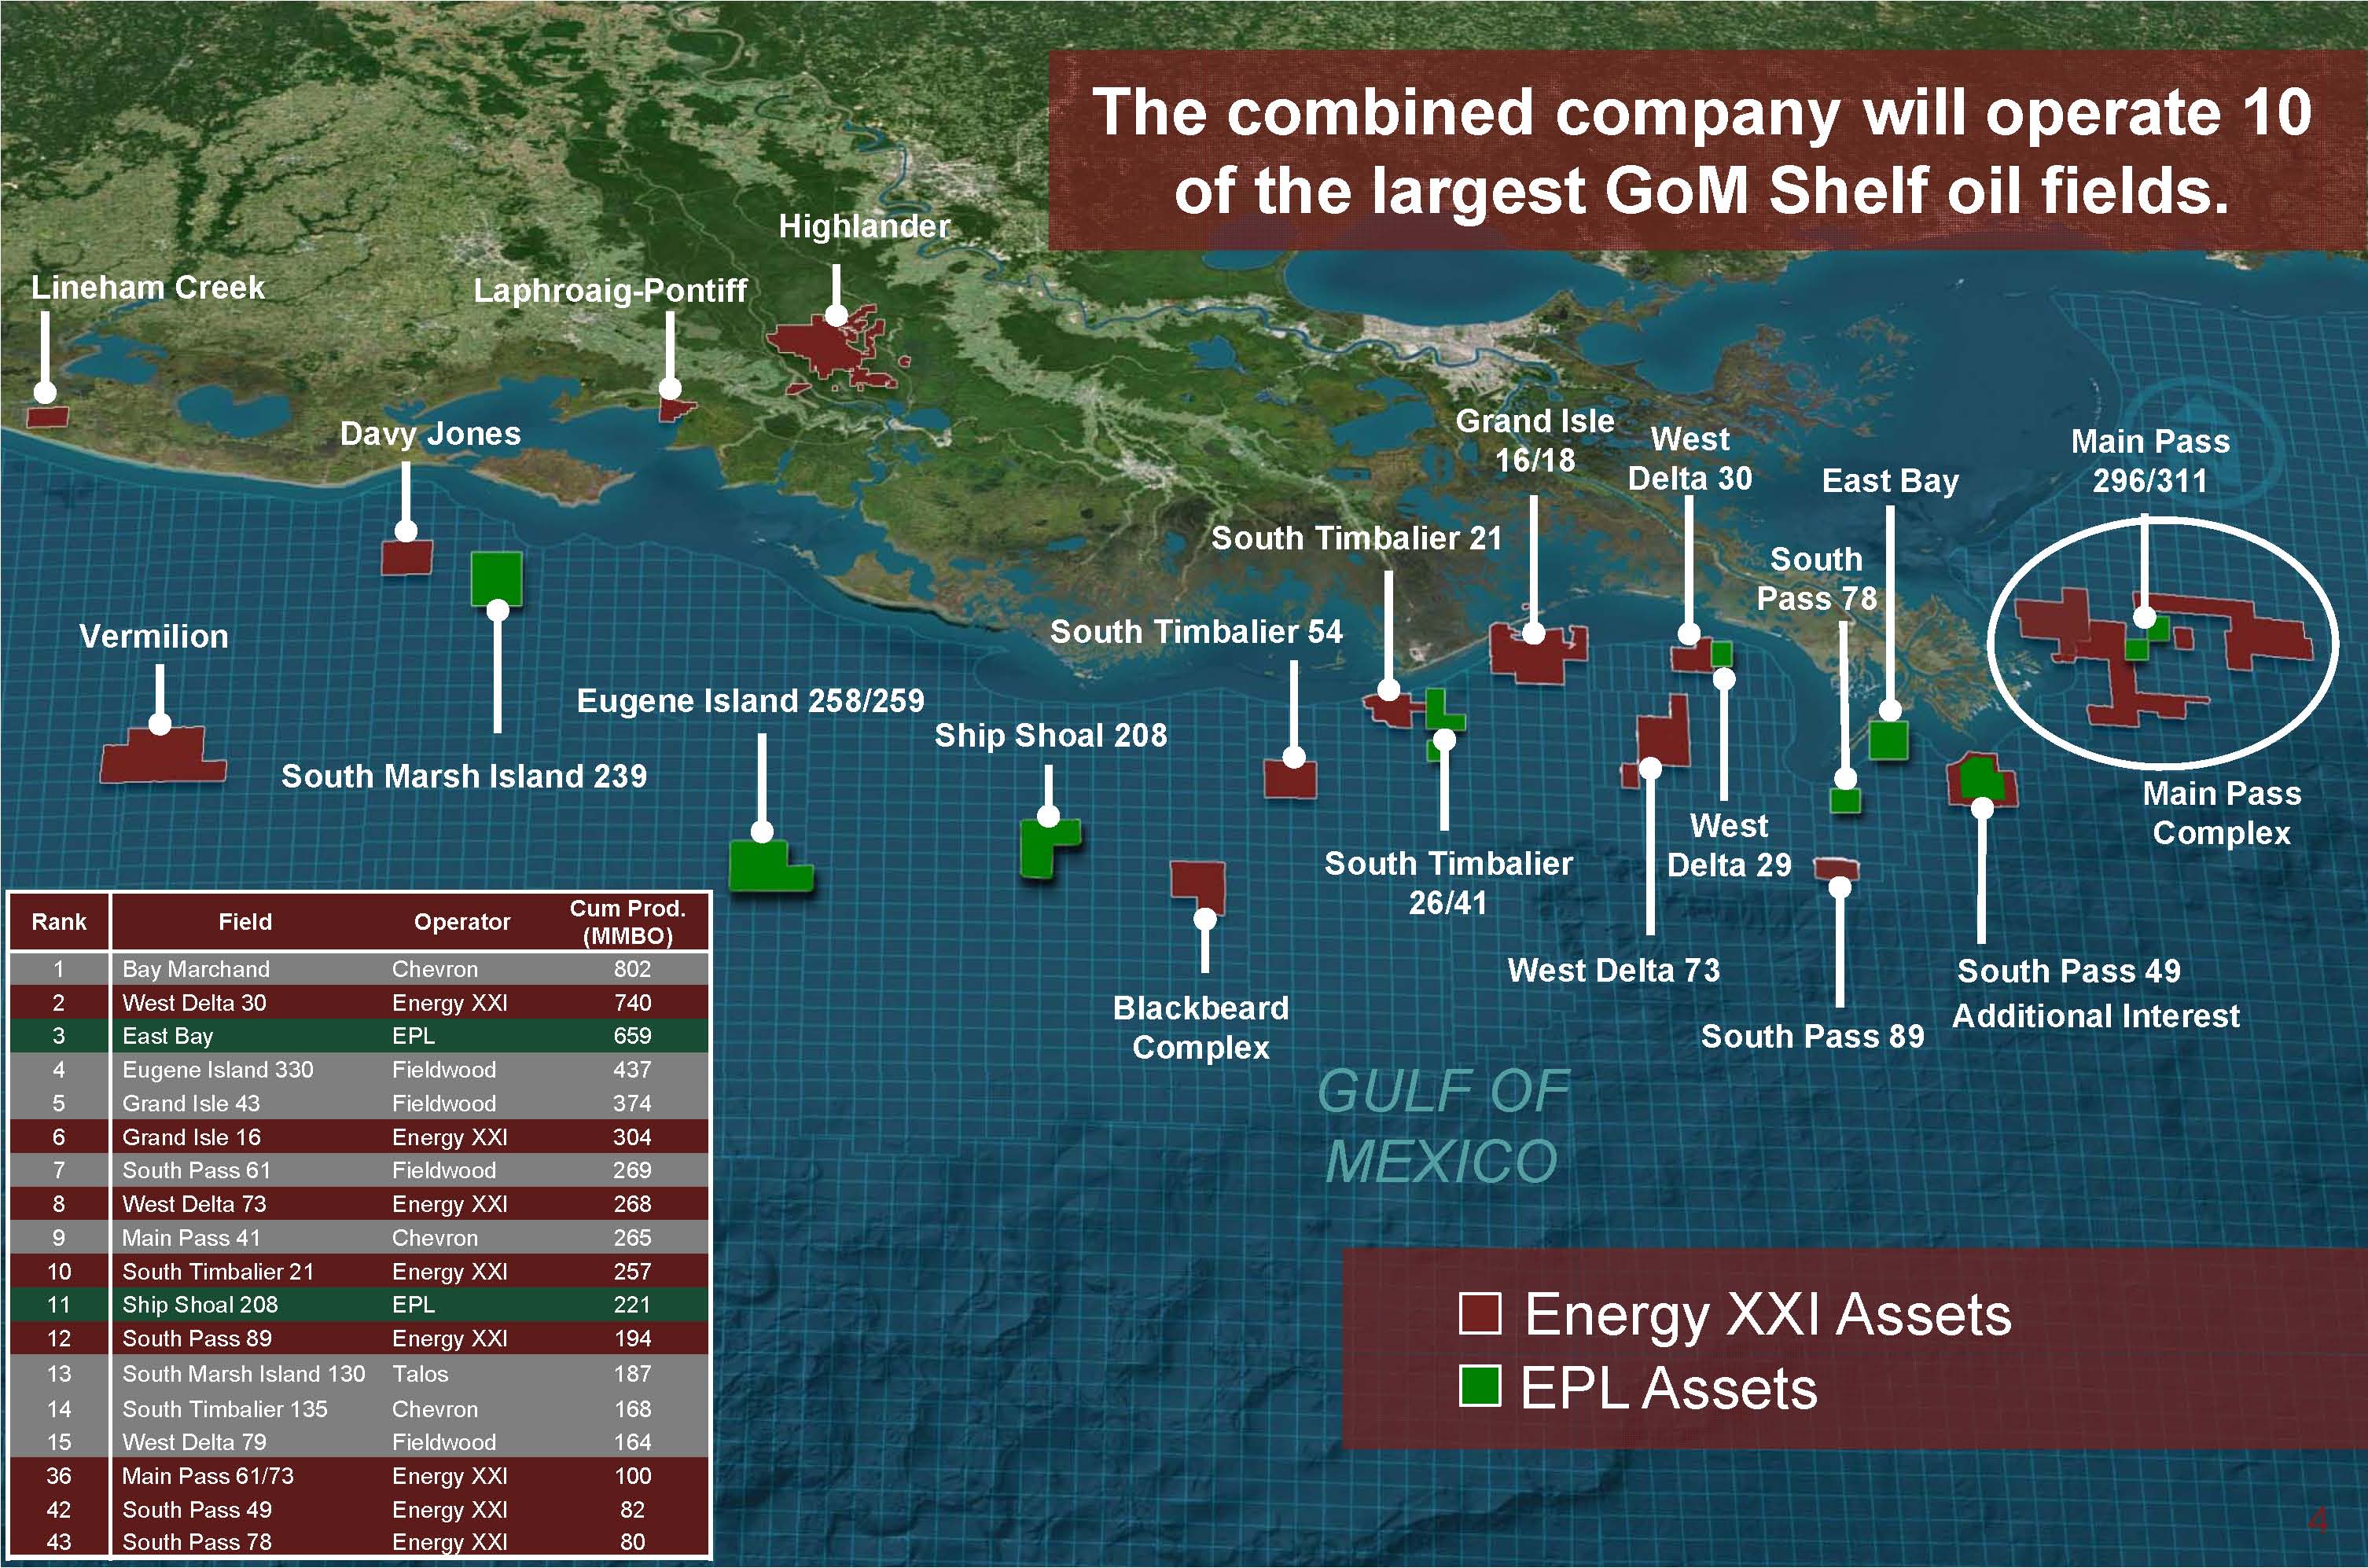 Energy XXI Now the Largest Independent Operating on the GOM Shelf with $2.3B ...3012 x 1995